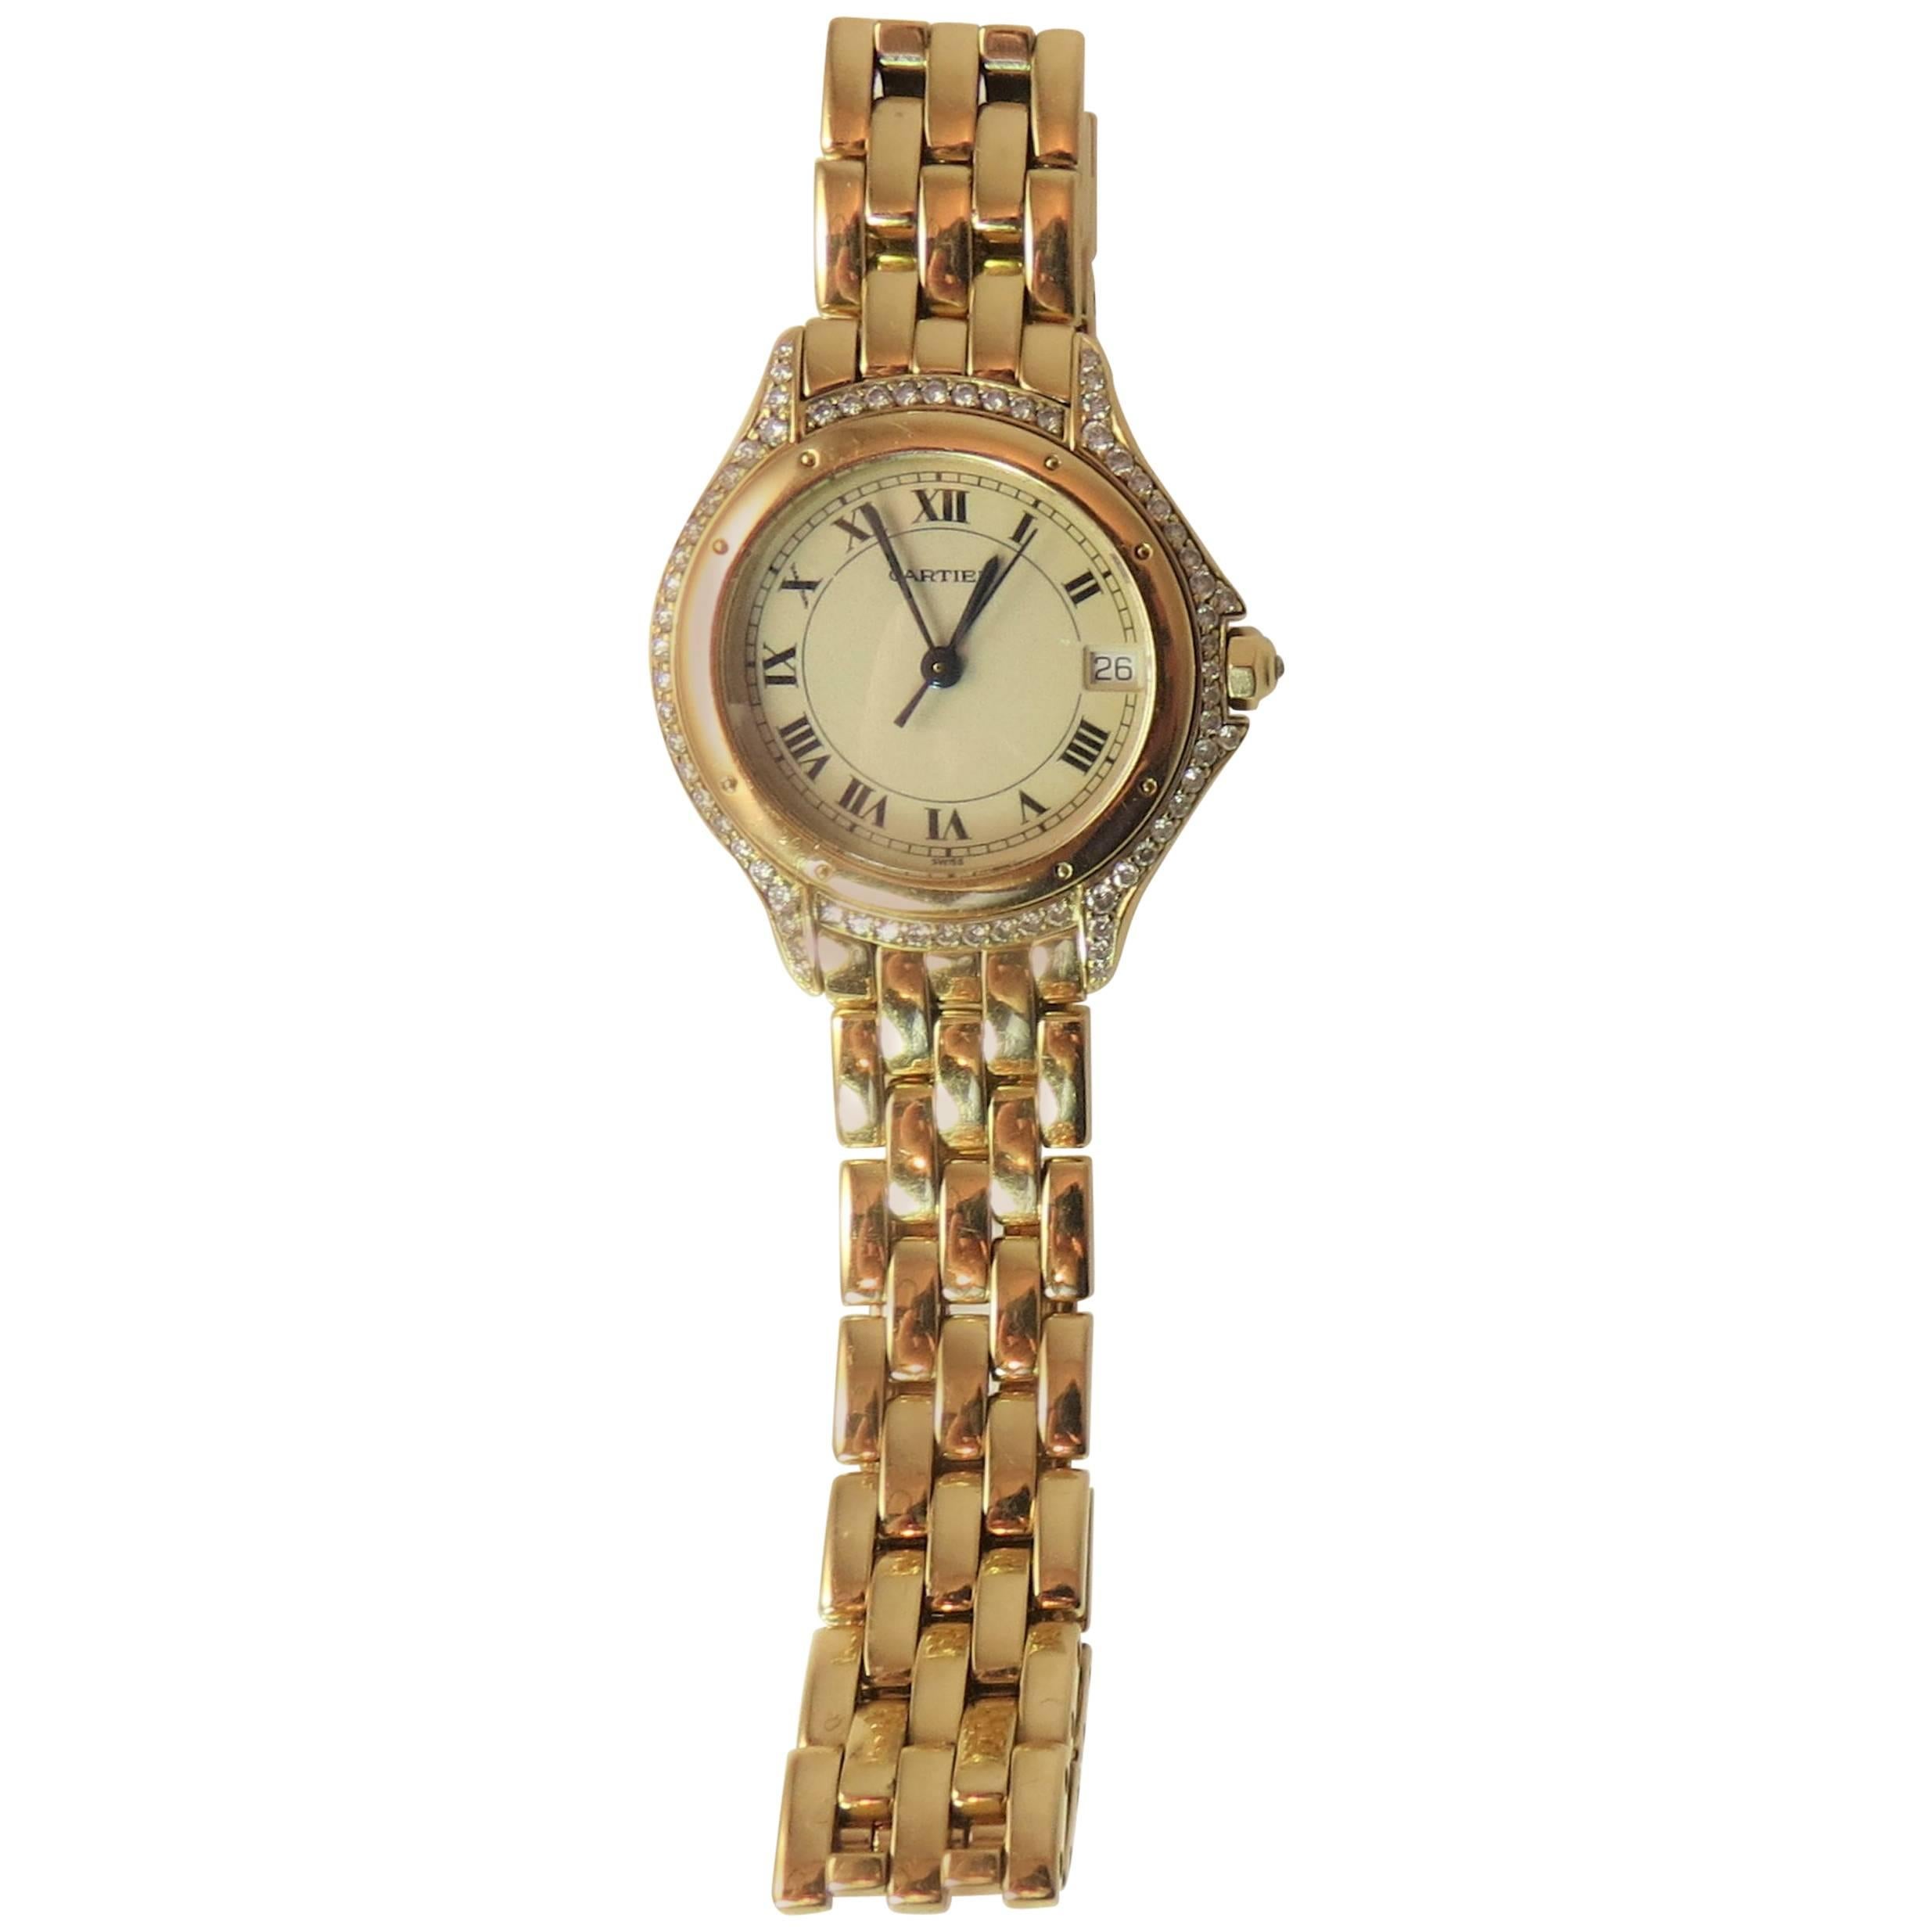 Ladies Pre-owned Cartier 18K Yellow Gold Diamond Cougar Bracelet Watch